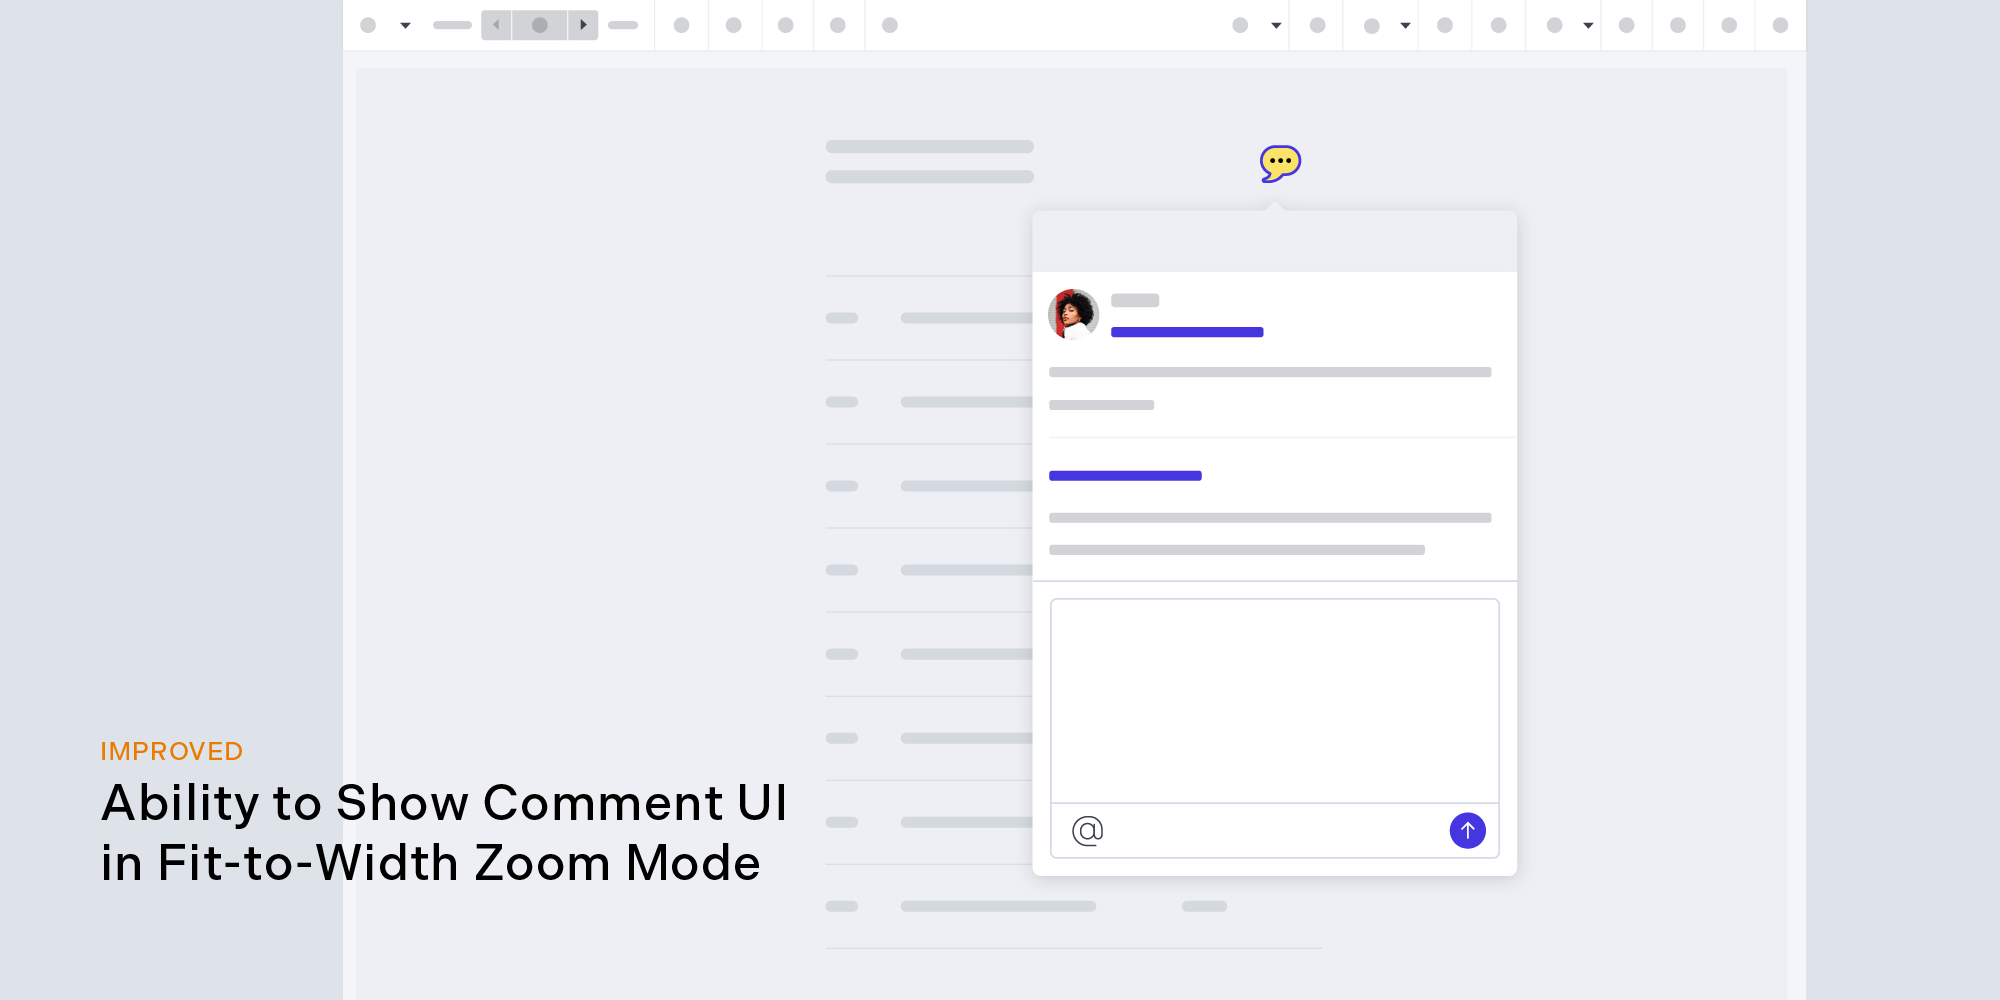 Comment UI in fit-to-width zoom mode